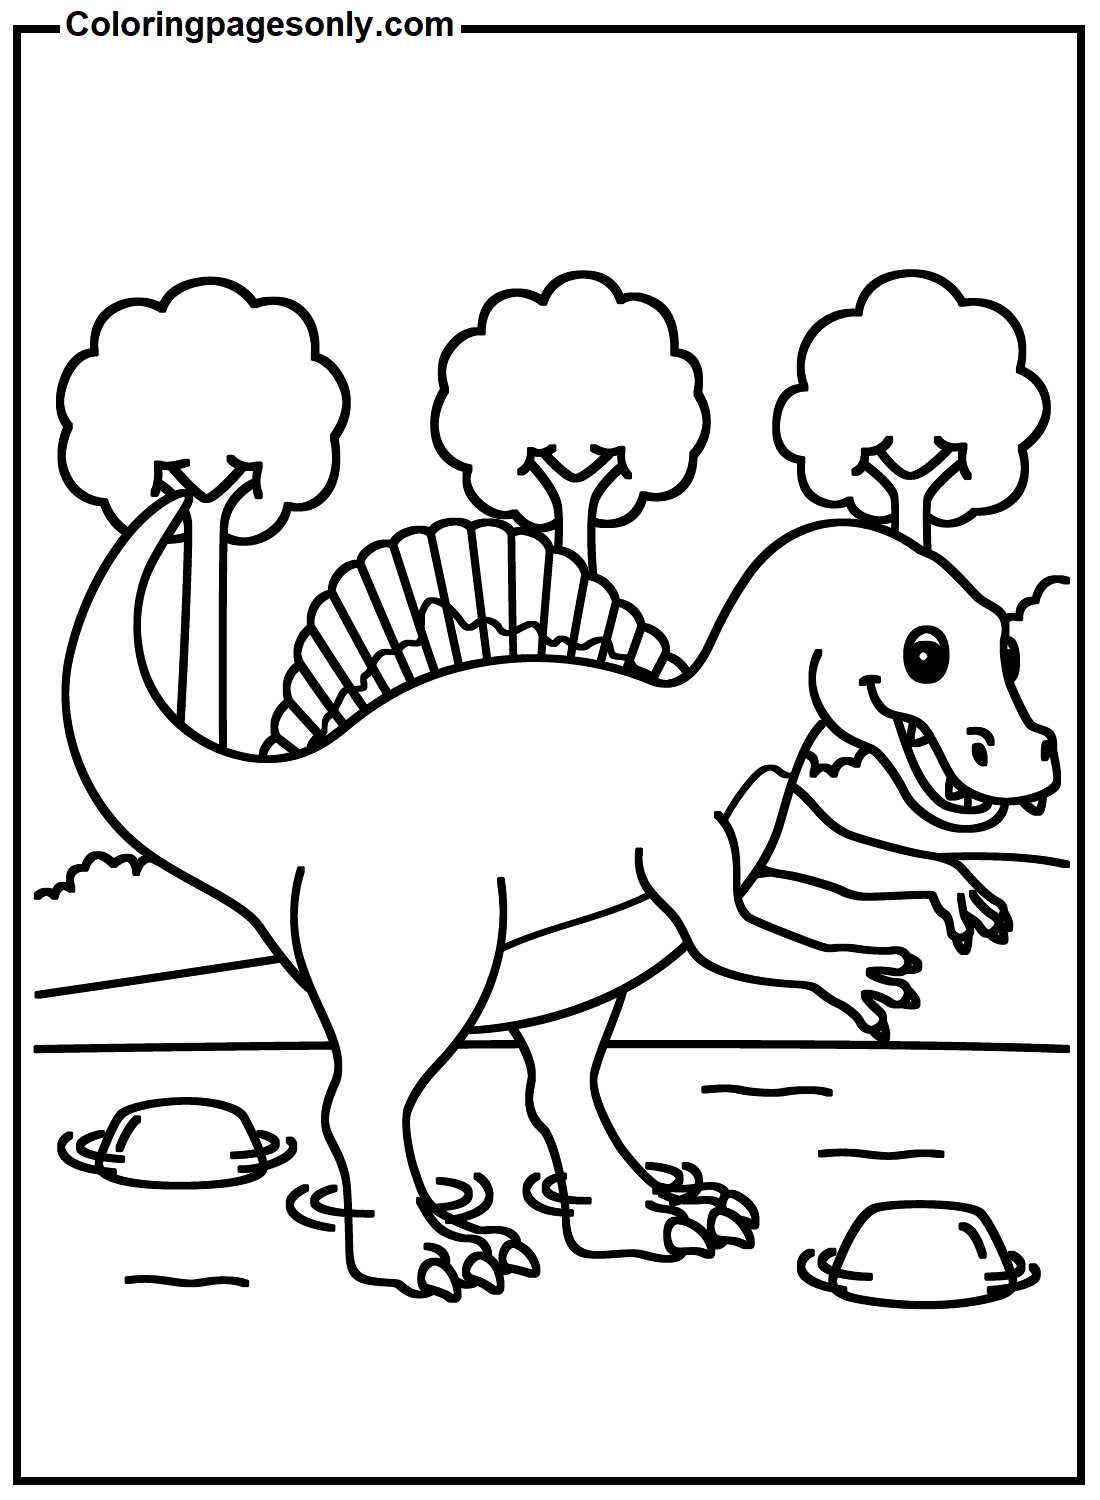 Coloriages Spinosaurus Heureux - Coloriages Spinosaurus - Des dedans Coloriage Spinosaurus